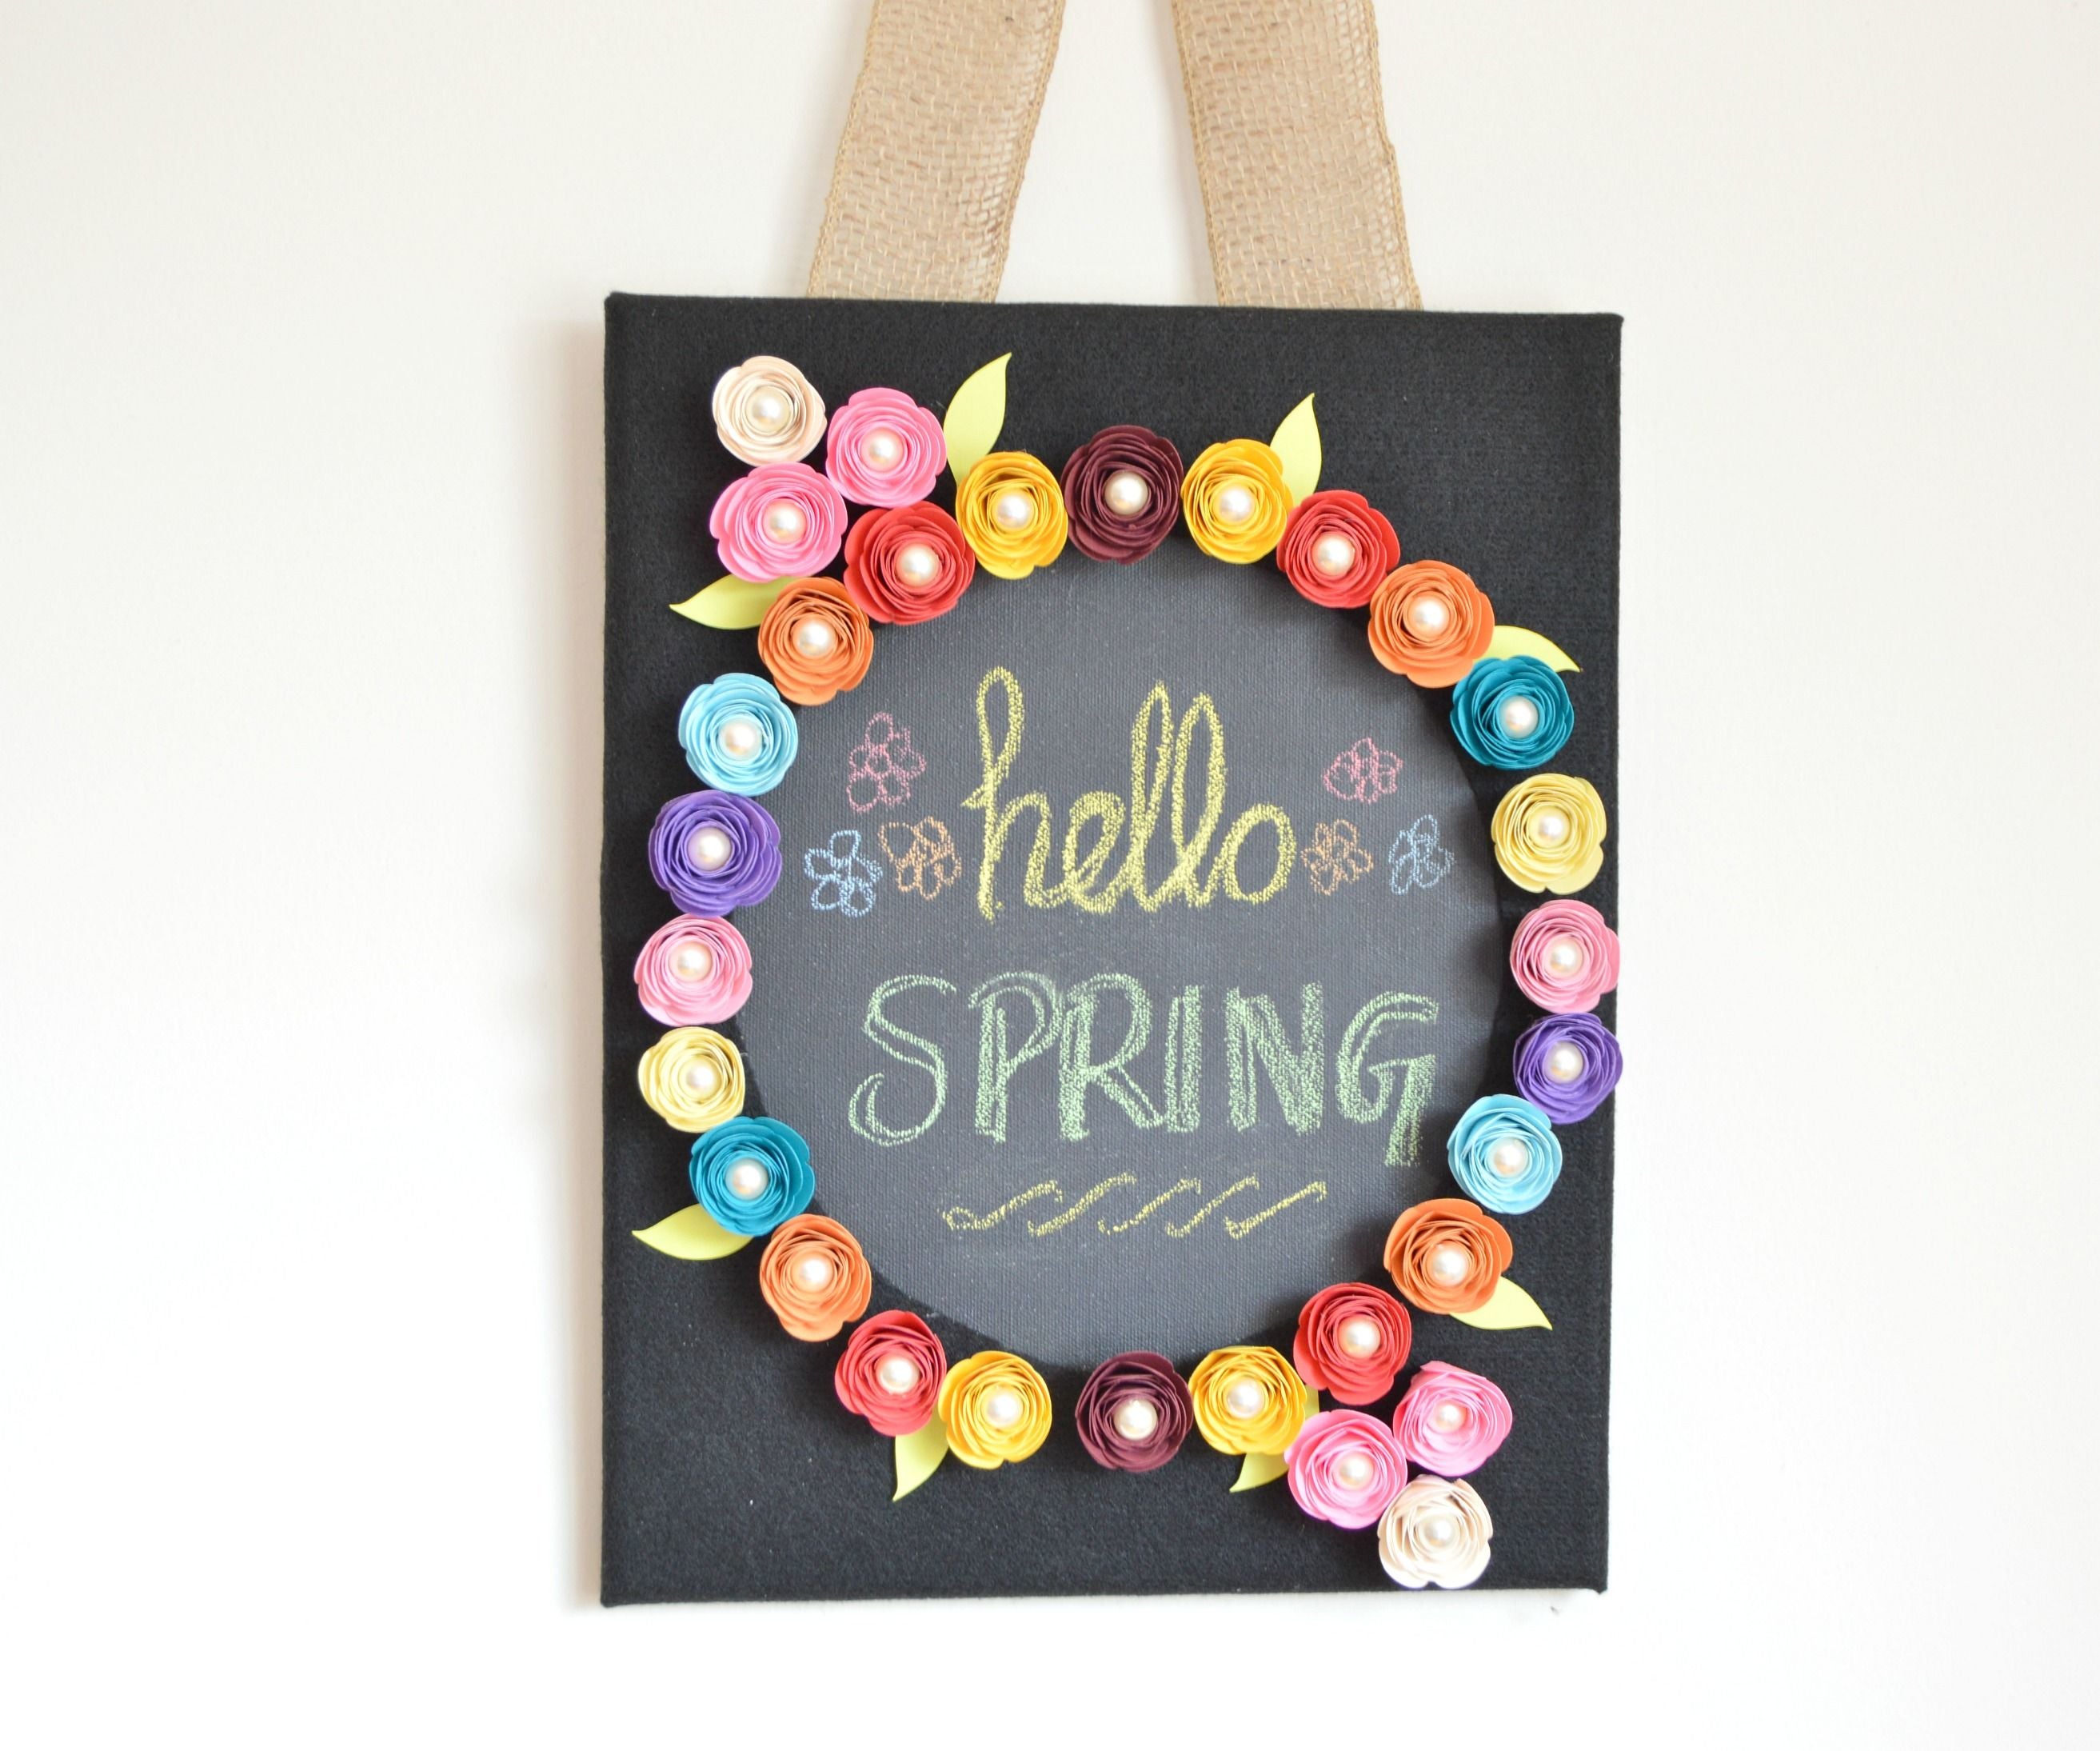 DIY Chalkboard Canvas With Interchangeable Paper Roses for All Seasons